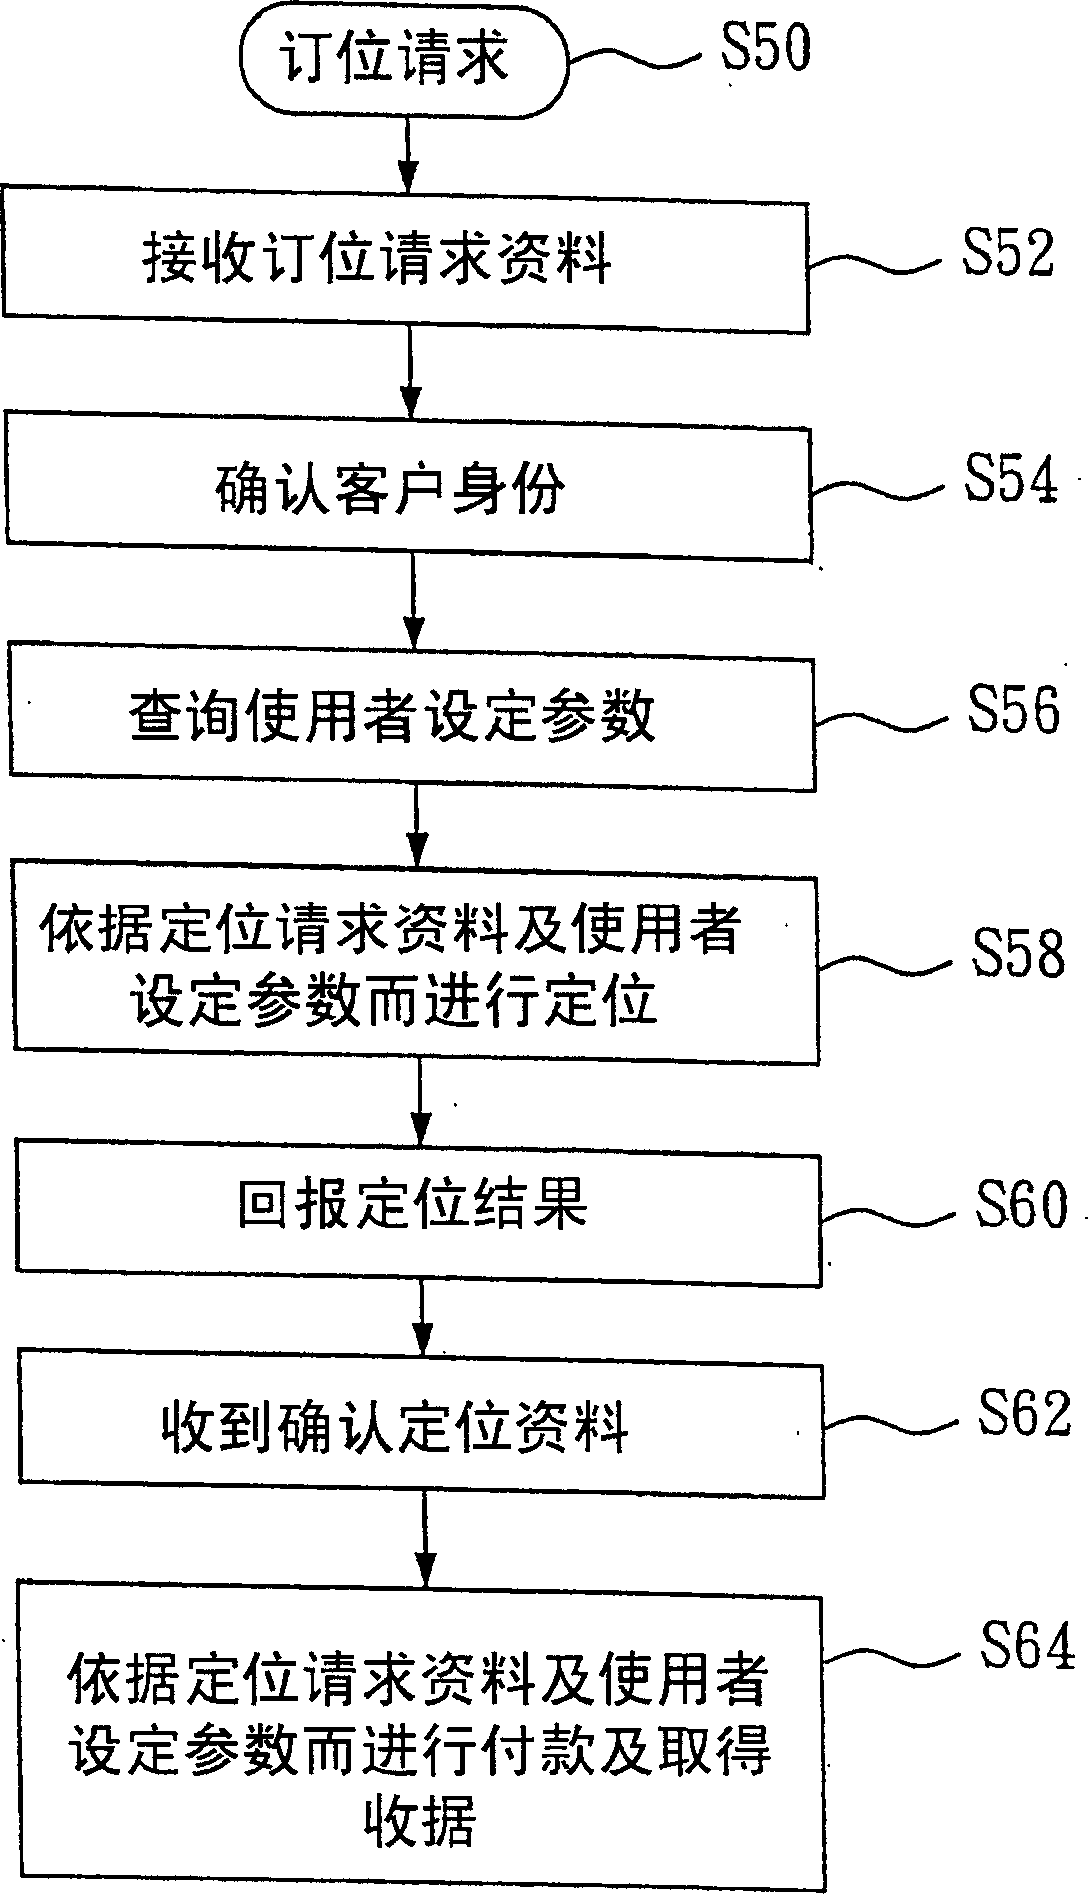 Method and system for immediate location using electronic file